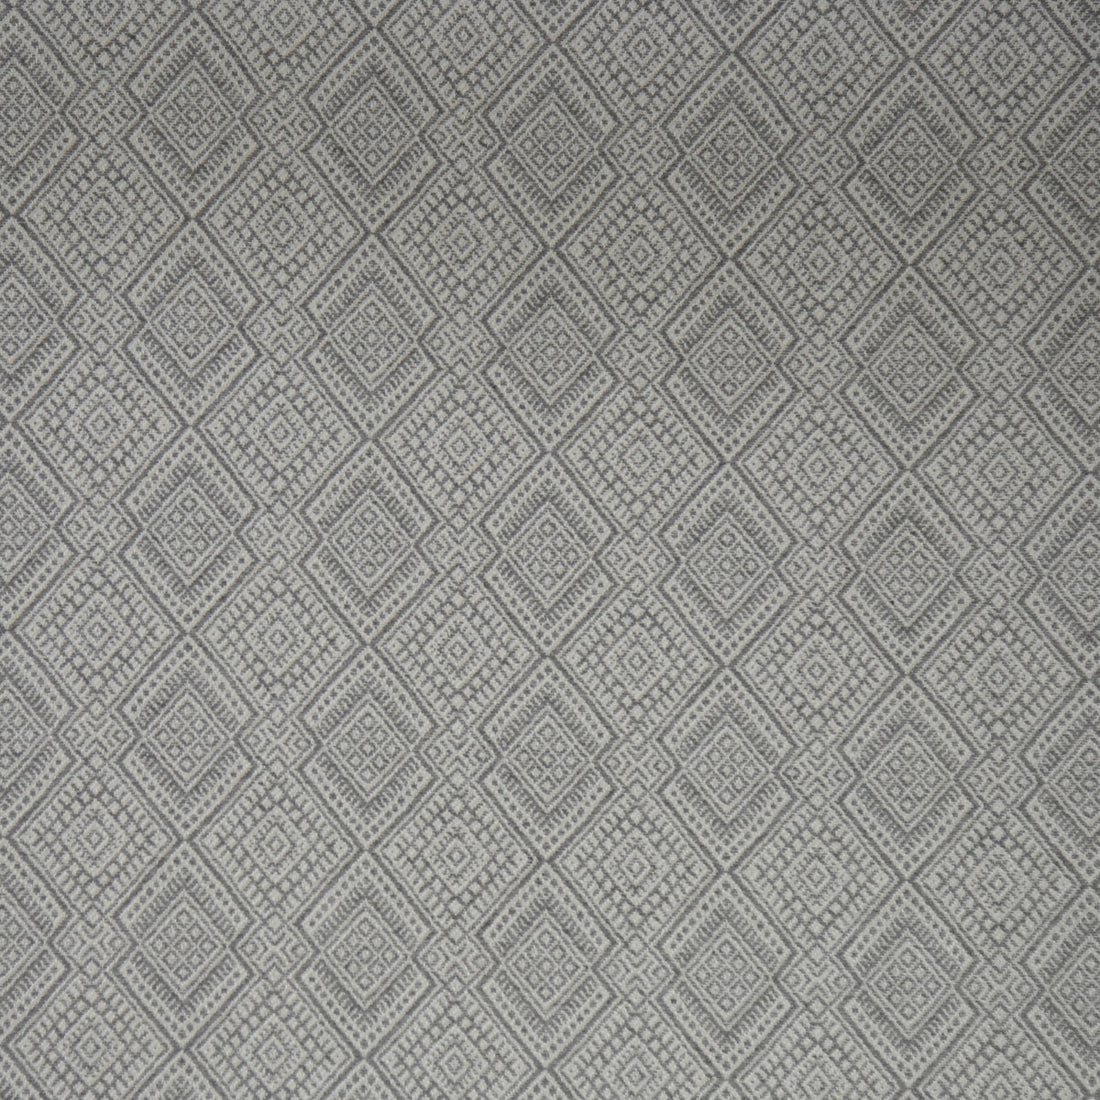 Iguazu fabric in platinum color - pattern 35551.11.0 - by Kravet Couture in the Modern Colors-Sojourn Collection collection